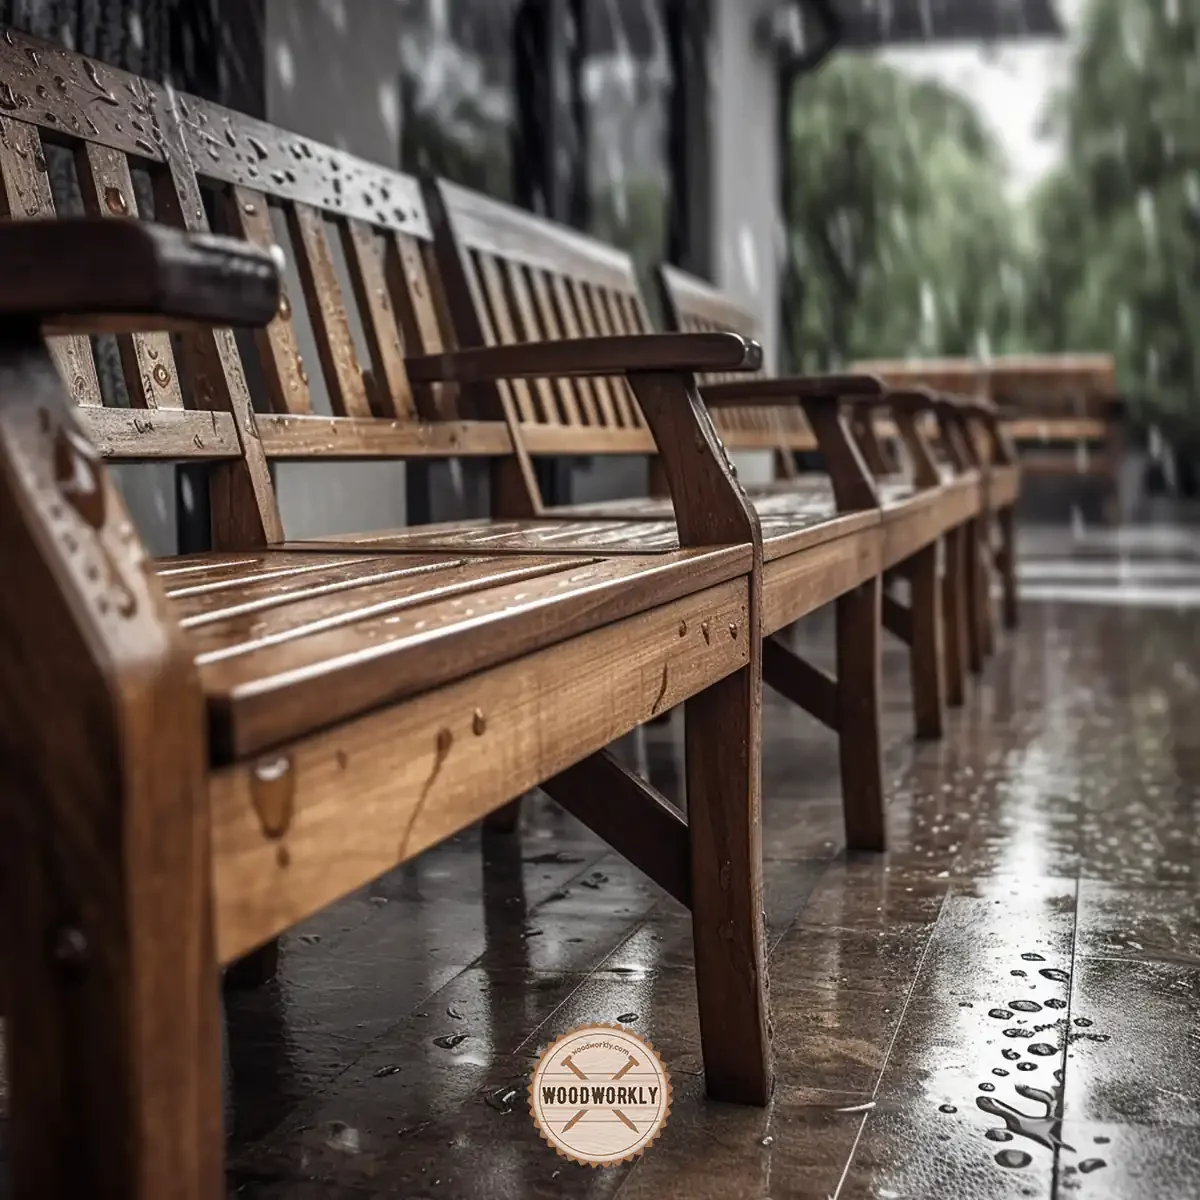 Wooden benches impacted by the rainy weather